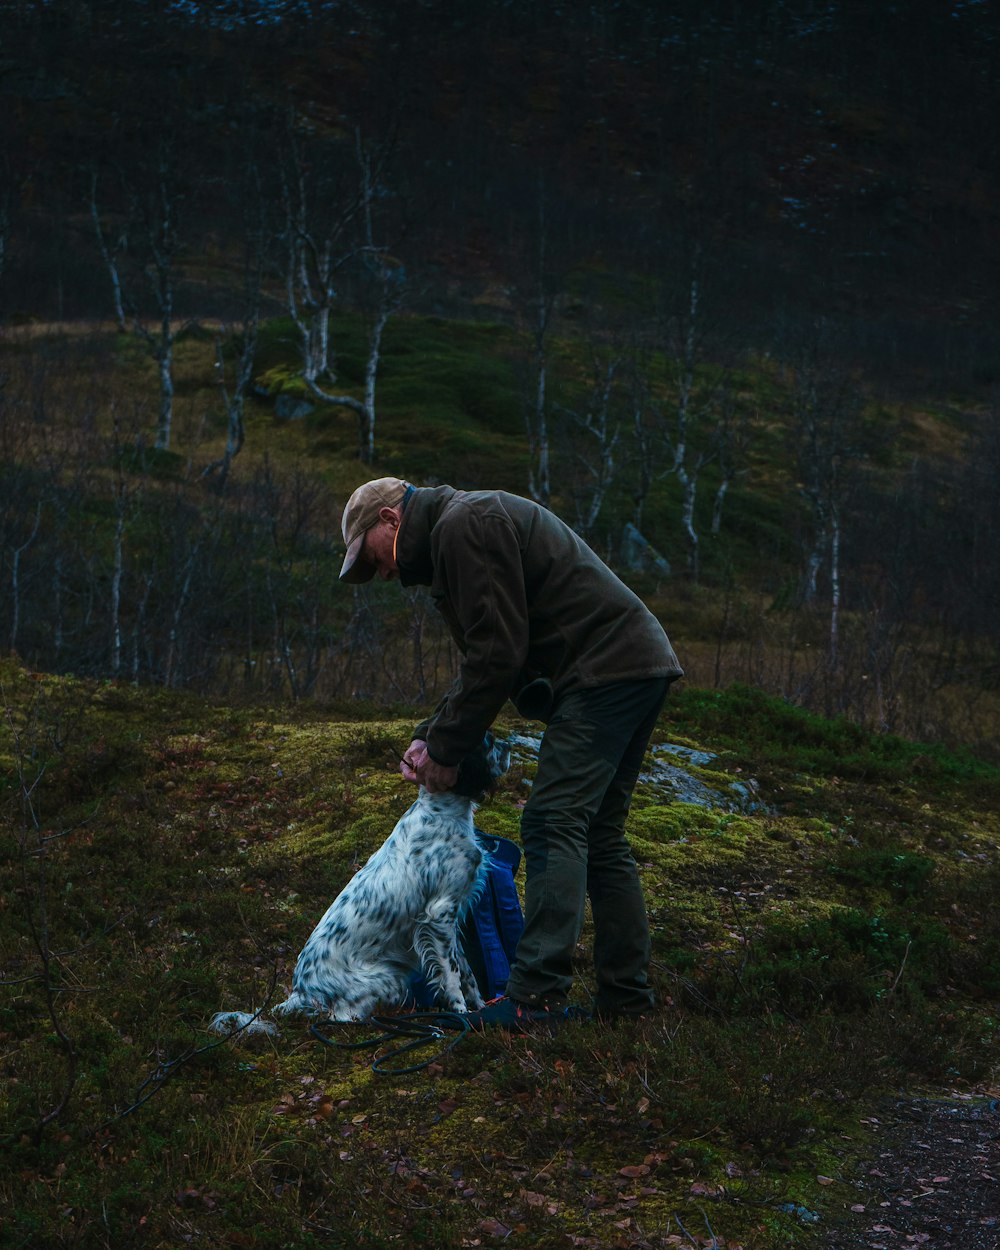 a man is grooming a dog in a field